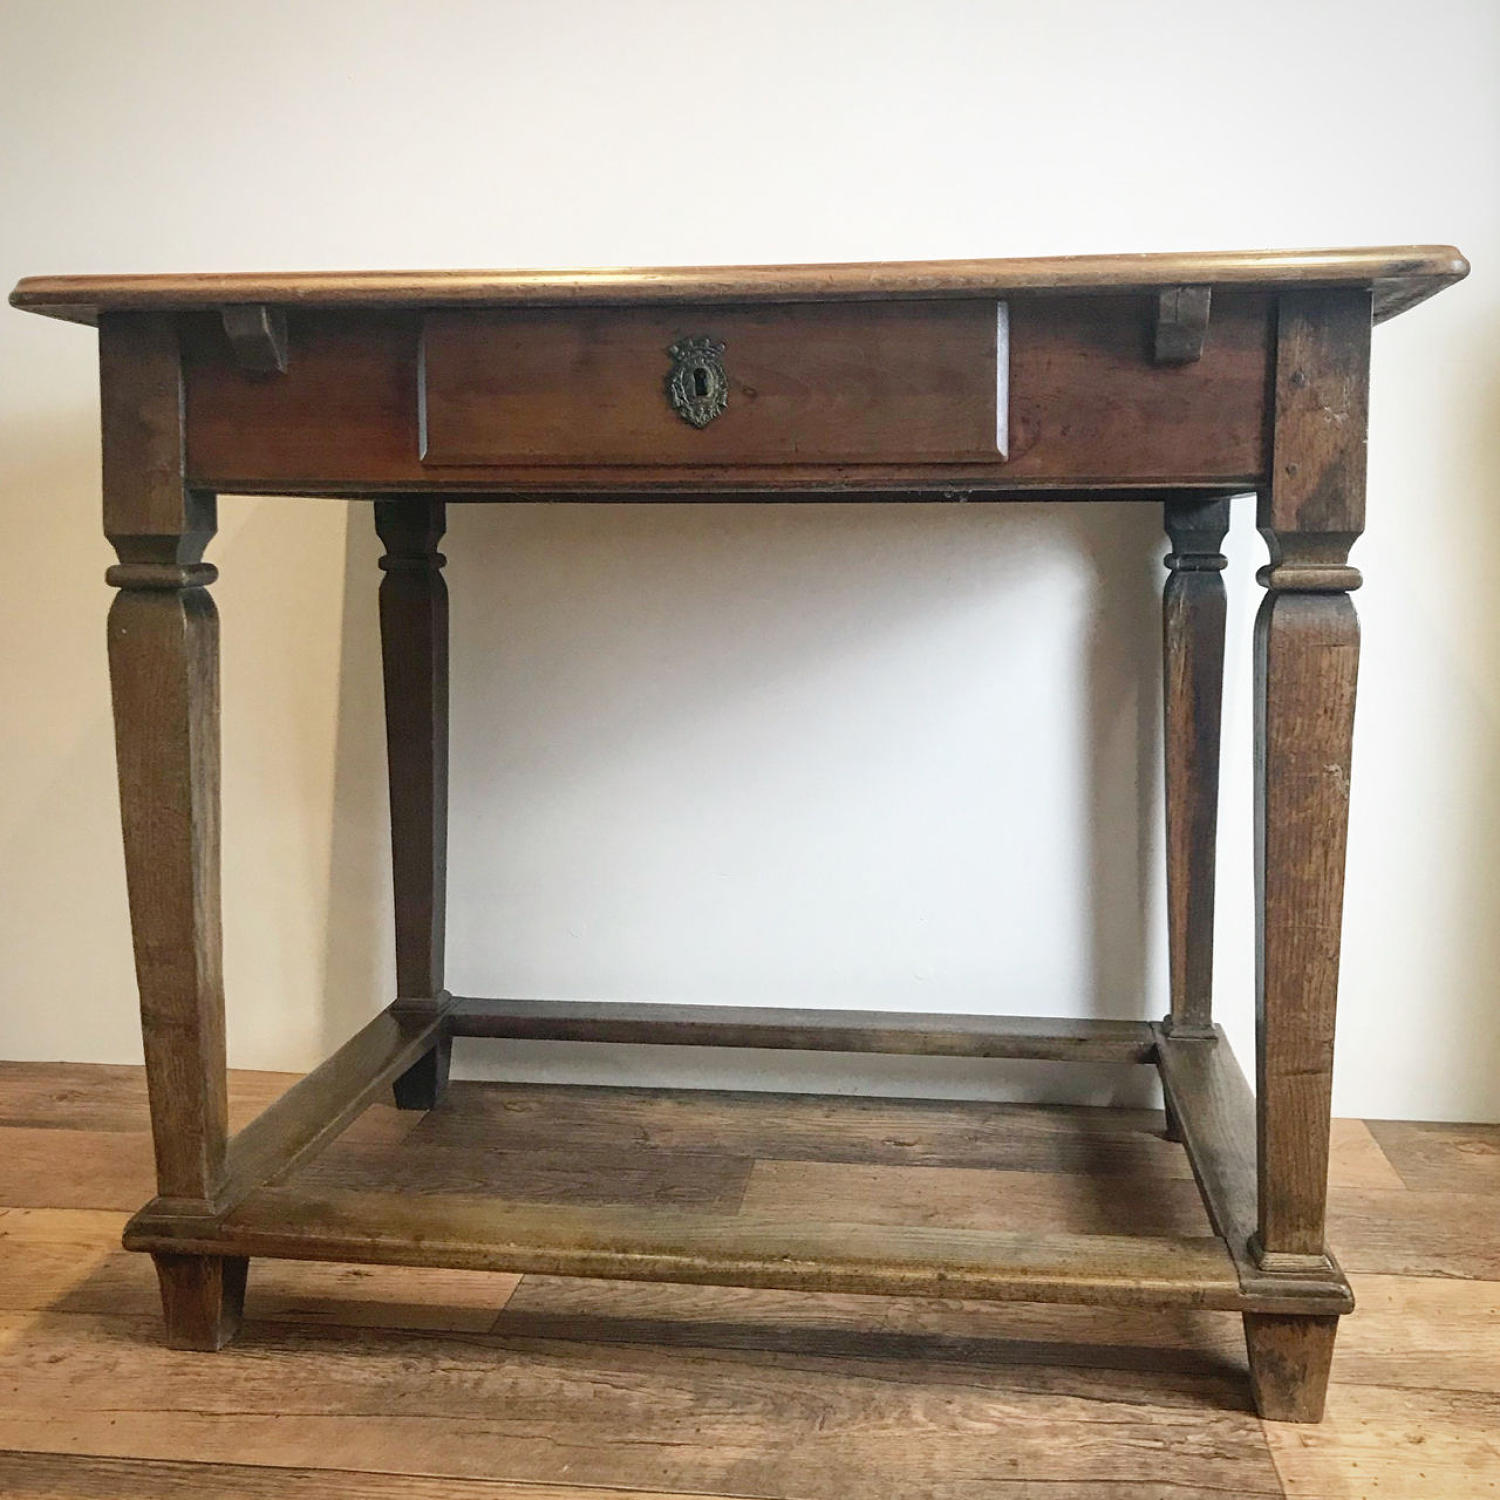 ANTIQUE FRENCH FRUIT WOOD SIDE TABLE